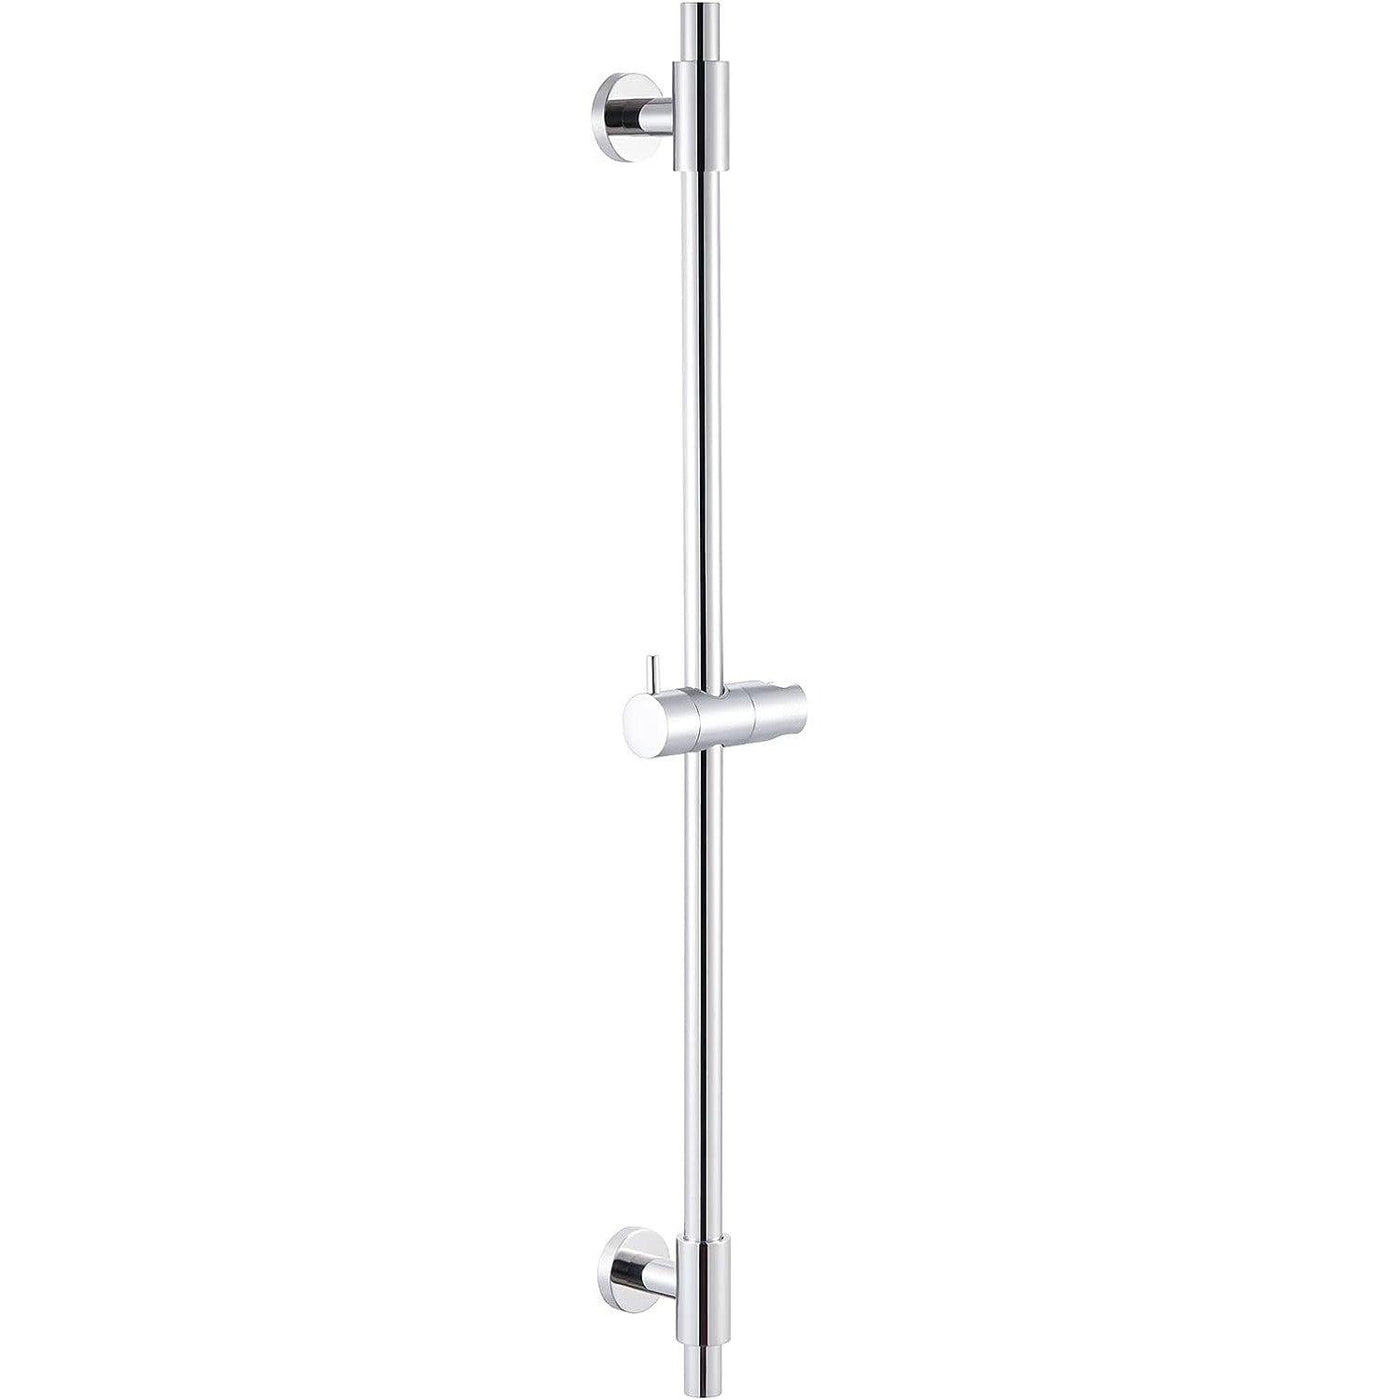 KES Shower Riser Rail with Adjustable Shower Head Holder, Wall Mounted - Massive Discounts